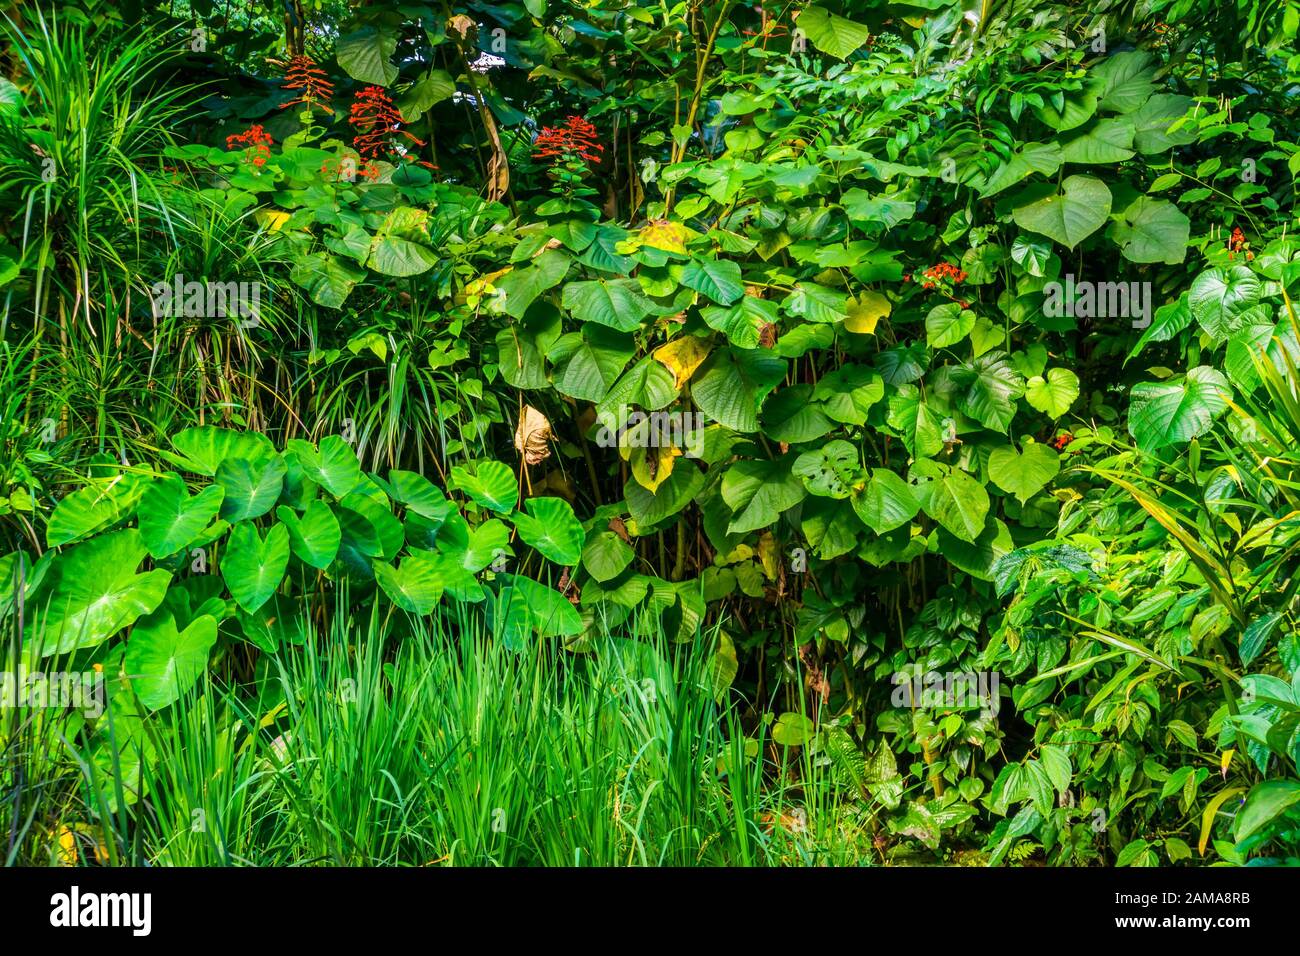 tropical garden full with diverse exotic plant species, wild exotic vegetation, nature background Stock Photo